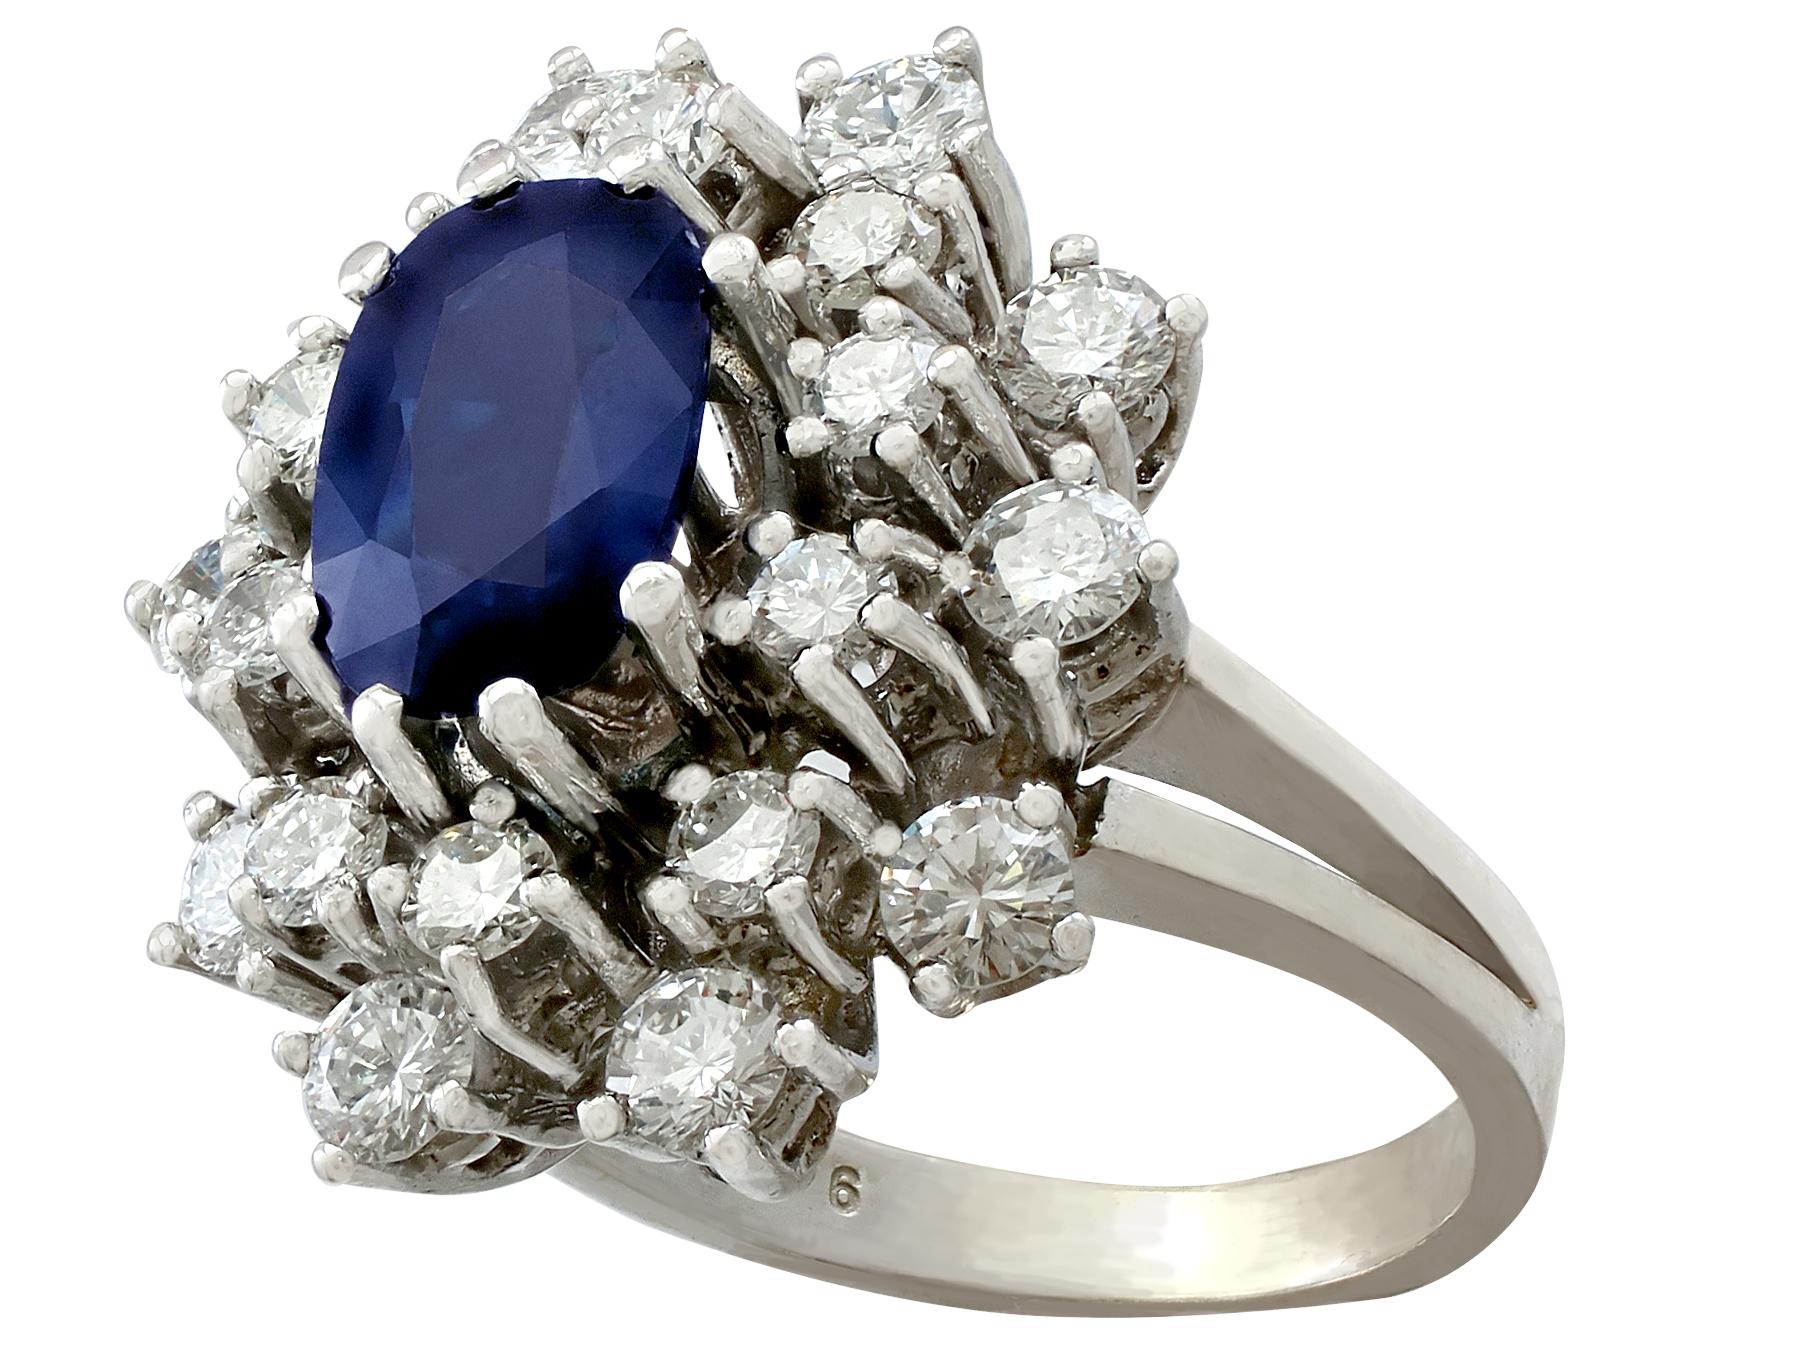 2.20 Carat Sapphire and 2.54 Carat Diamond White Gold Cocktail Ring In Excellent Condition For Sale In Jesmond, Newcastle Upon Tyne